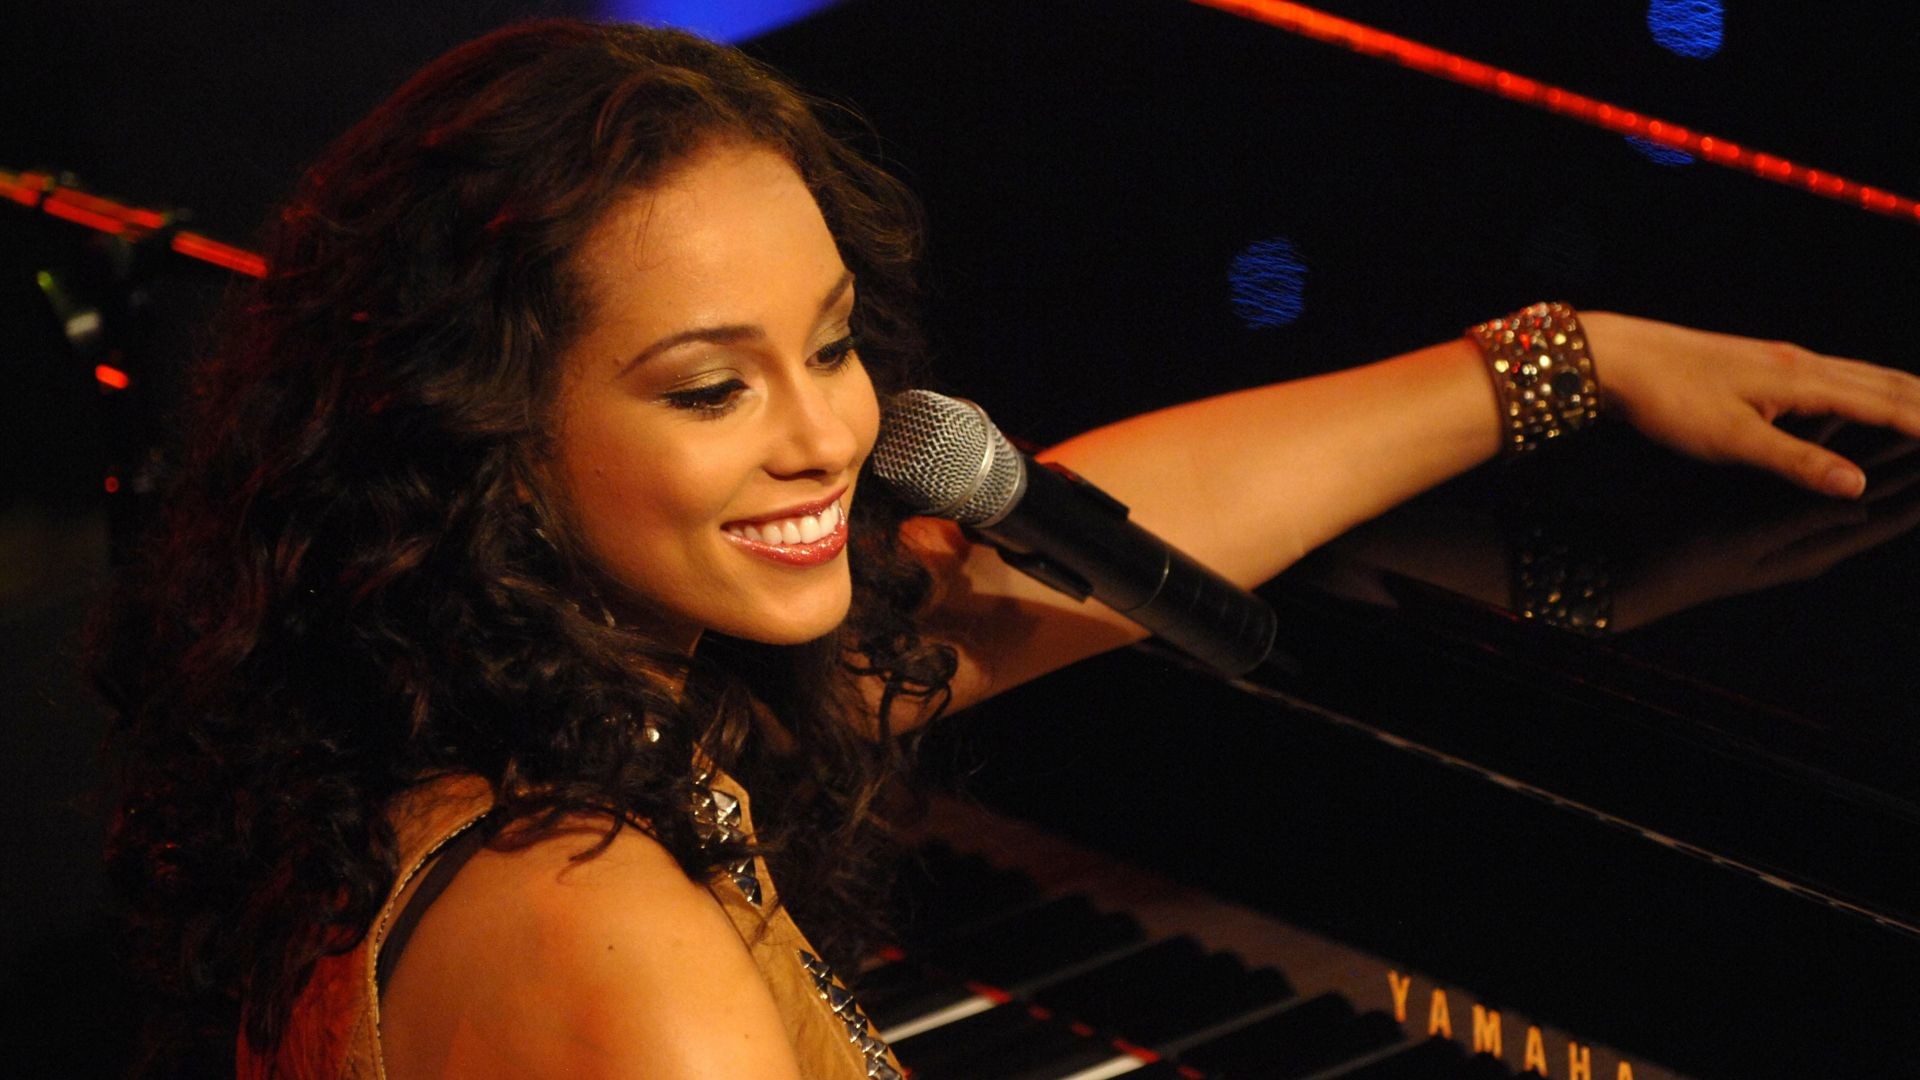 Wallpaper  Music  photo  picture  Alicia keys sexy figure face view